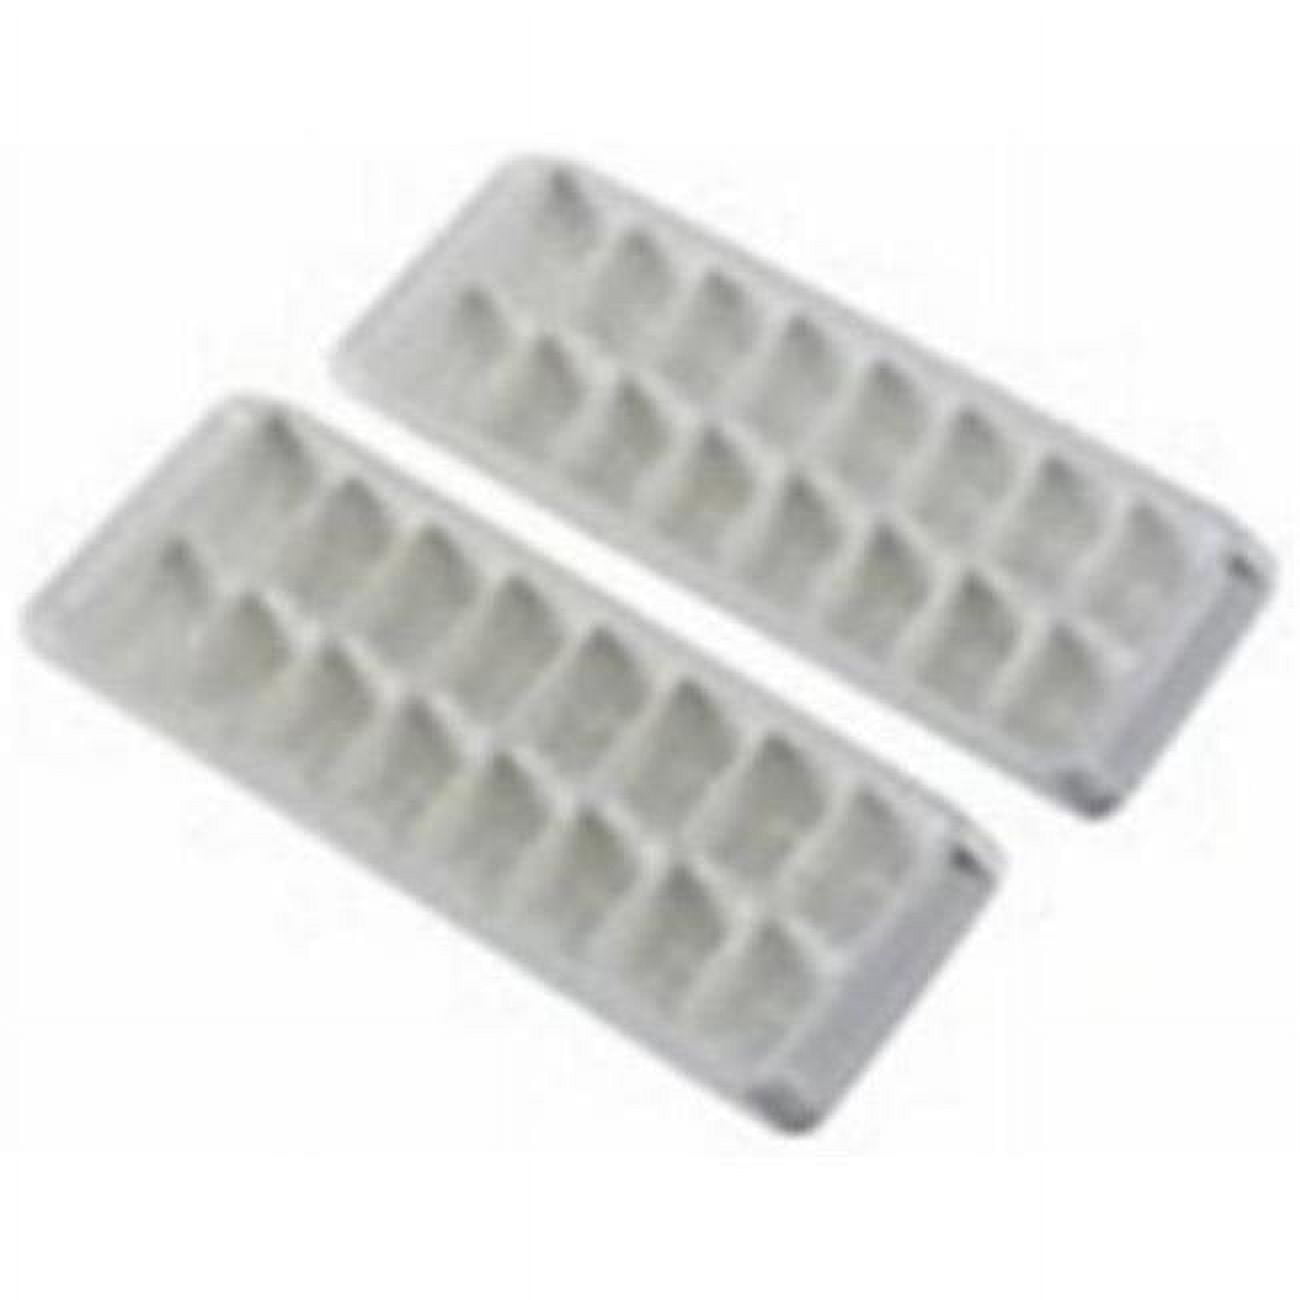 Sagit 3Pcs Covered Ice Tray Set With 14 Ice Cubes Molds Flexible Rubber  Plastic St - buy Sagit 3Pcs Covered Ice Tray Set With 14 Ice Cubes Molds  Flexible Rubber Plastic St